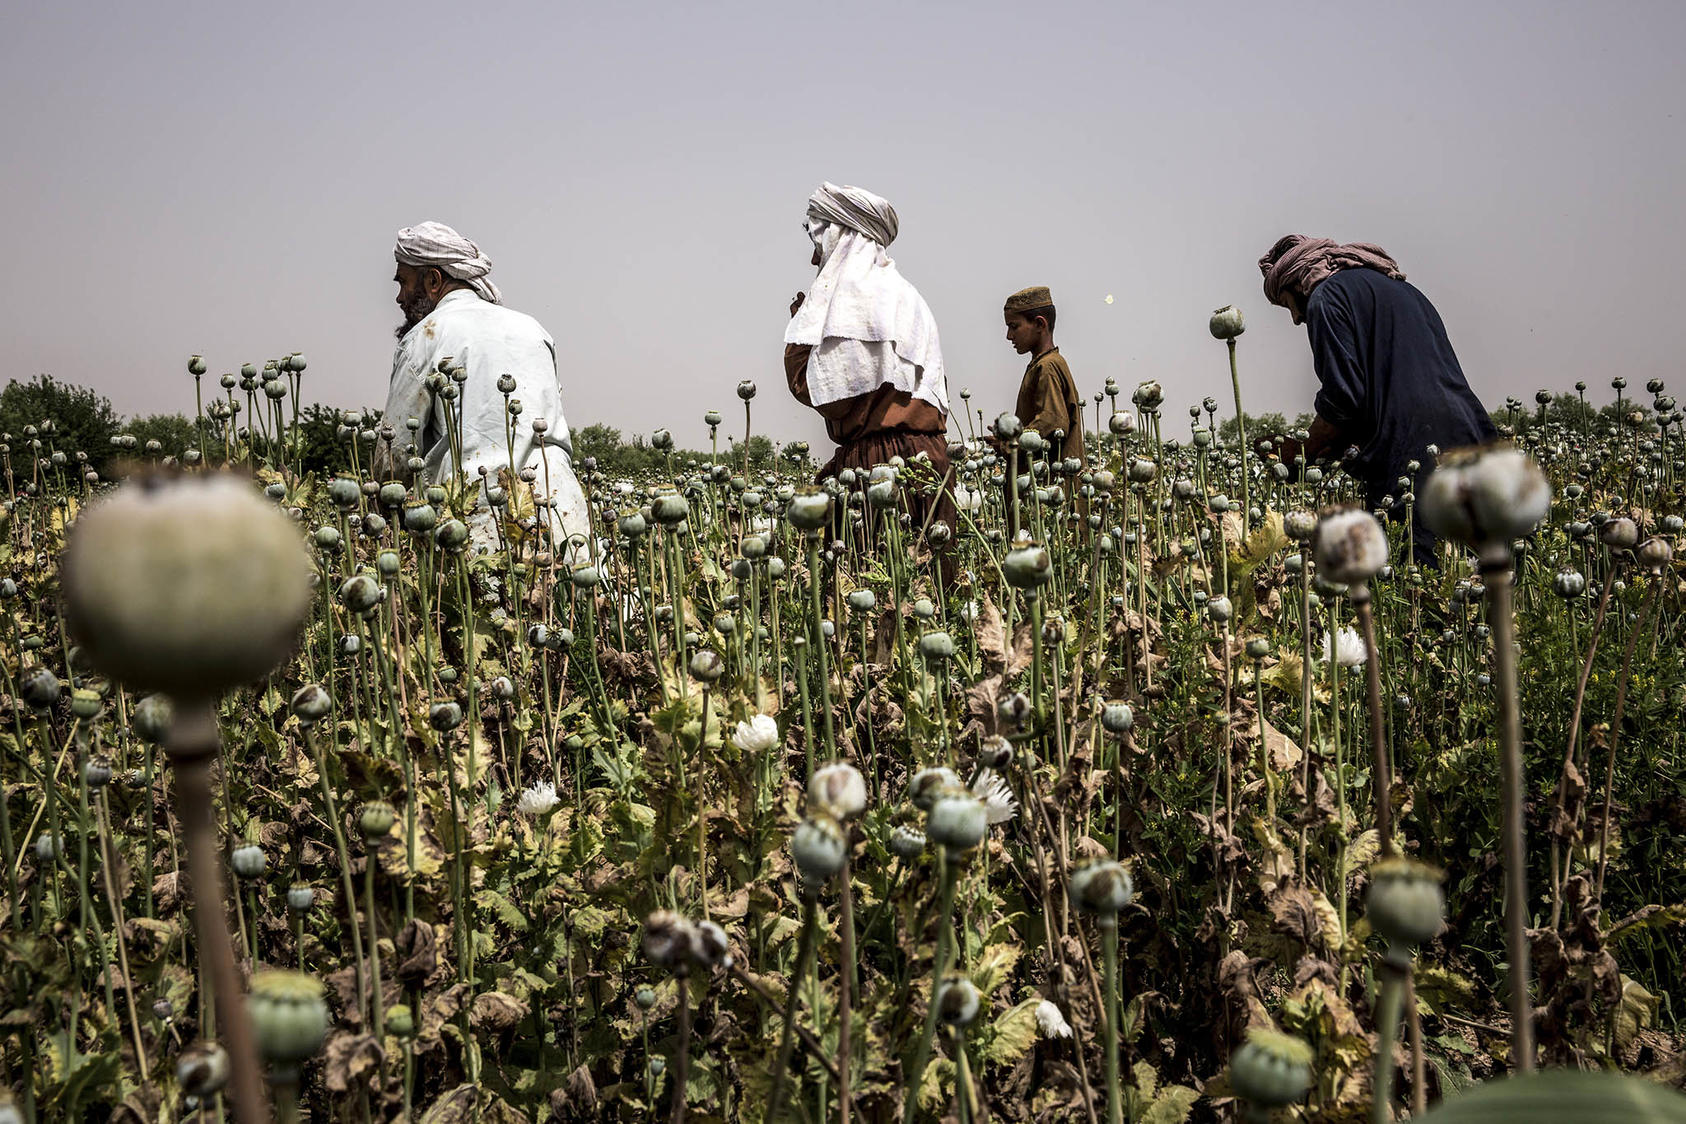 Afghan farmers harvest poppies in Helmand Province in Afghanistan, April 16, 2015. The Taliban banned cultivating opium poppy in April 2022, which  will have far-reaching negative consequences for Afghans. (Bryan Denton/The New York Times)